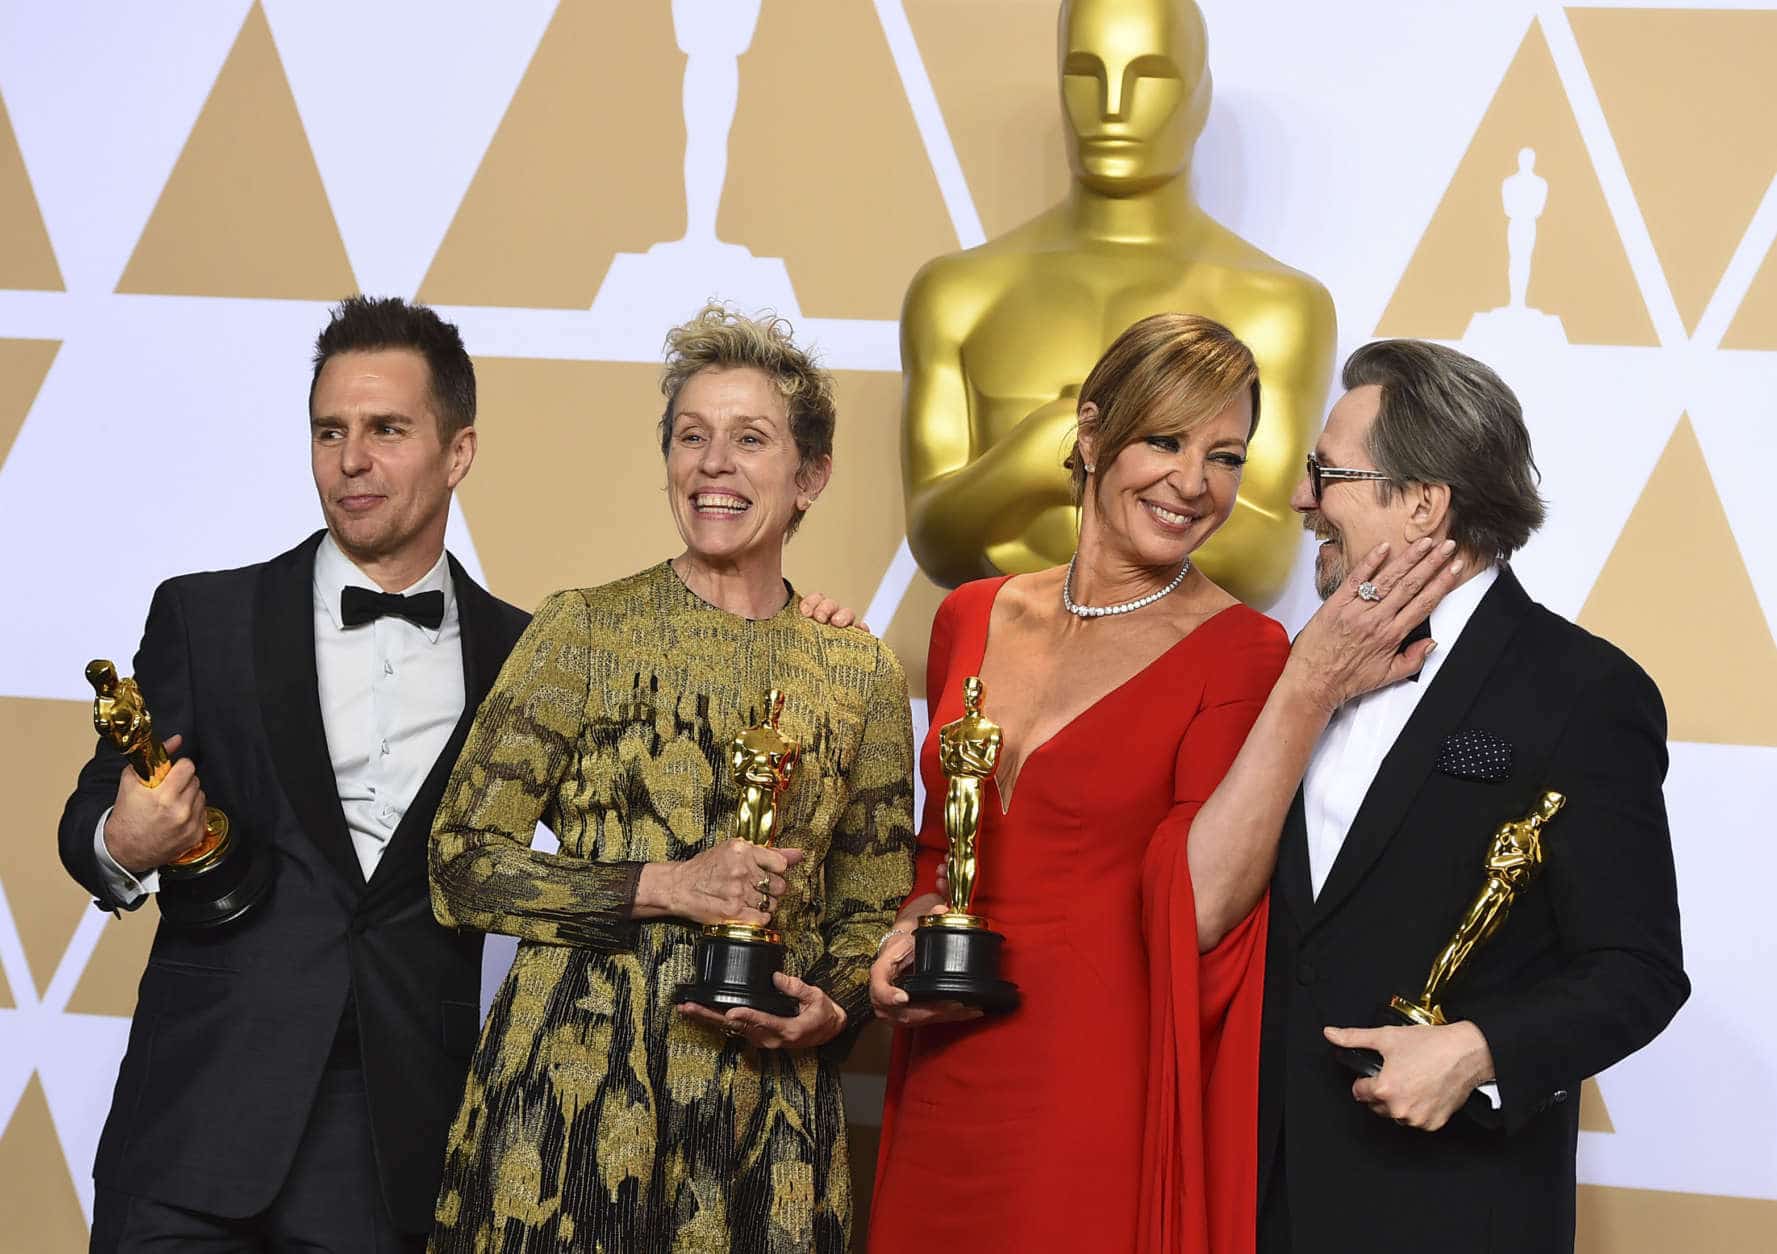 Sam Rockwell, from left, winner of the award for best performance by an actor in a supporting role for "Three Billboards Outside Ebbing, Missouri", Frances McDormand, winner of the award for best performance by an actress in a leading role for "Three Billboards Outside Ebbing, Missouri", Allison Janney, winner of the award for best performance by an actress in a supporting role for "I, Tonya", and Gary Oldman, winner of the award for best performance by an actor in a leading role for "Darkest Hour", pose in the press room at the Oscars on Sunday, March 4, 2018, at the Dolby Theatre in Los Angeles. (Photo by Jordan Strauss/Invision/AP)